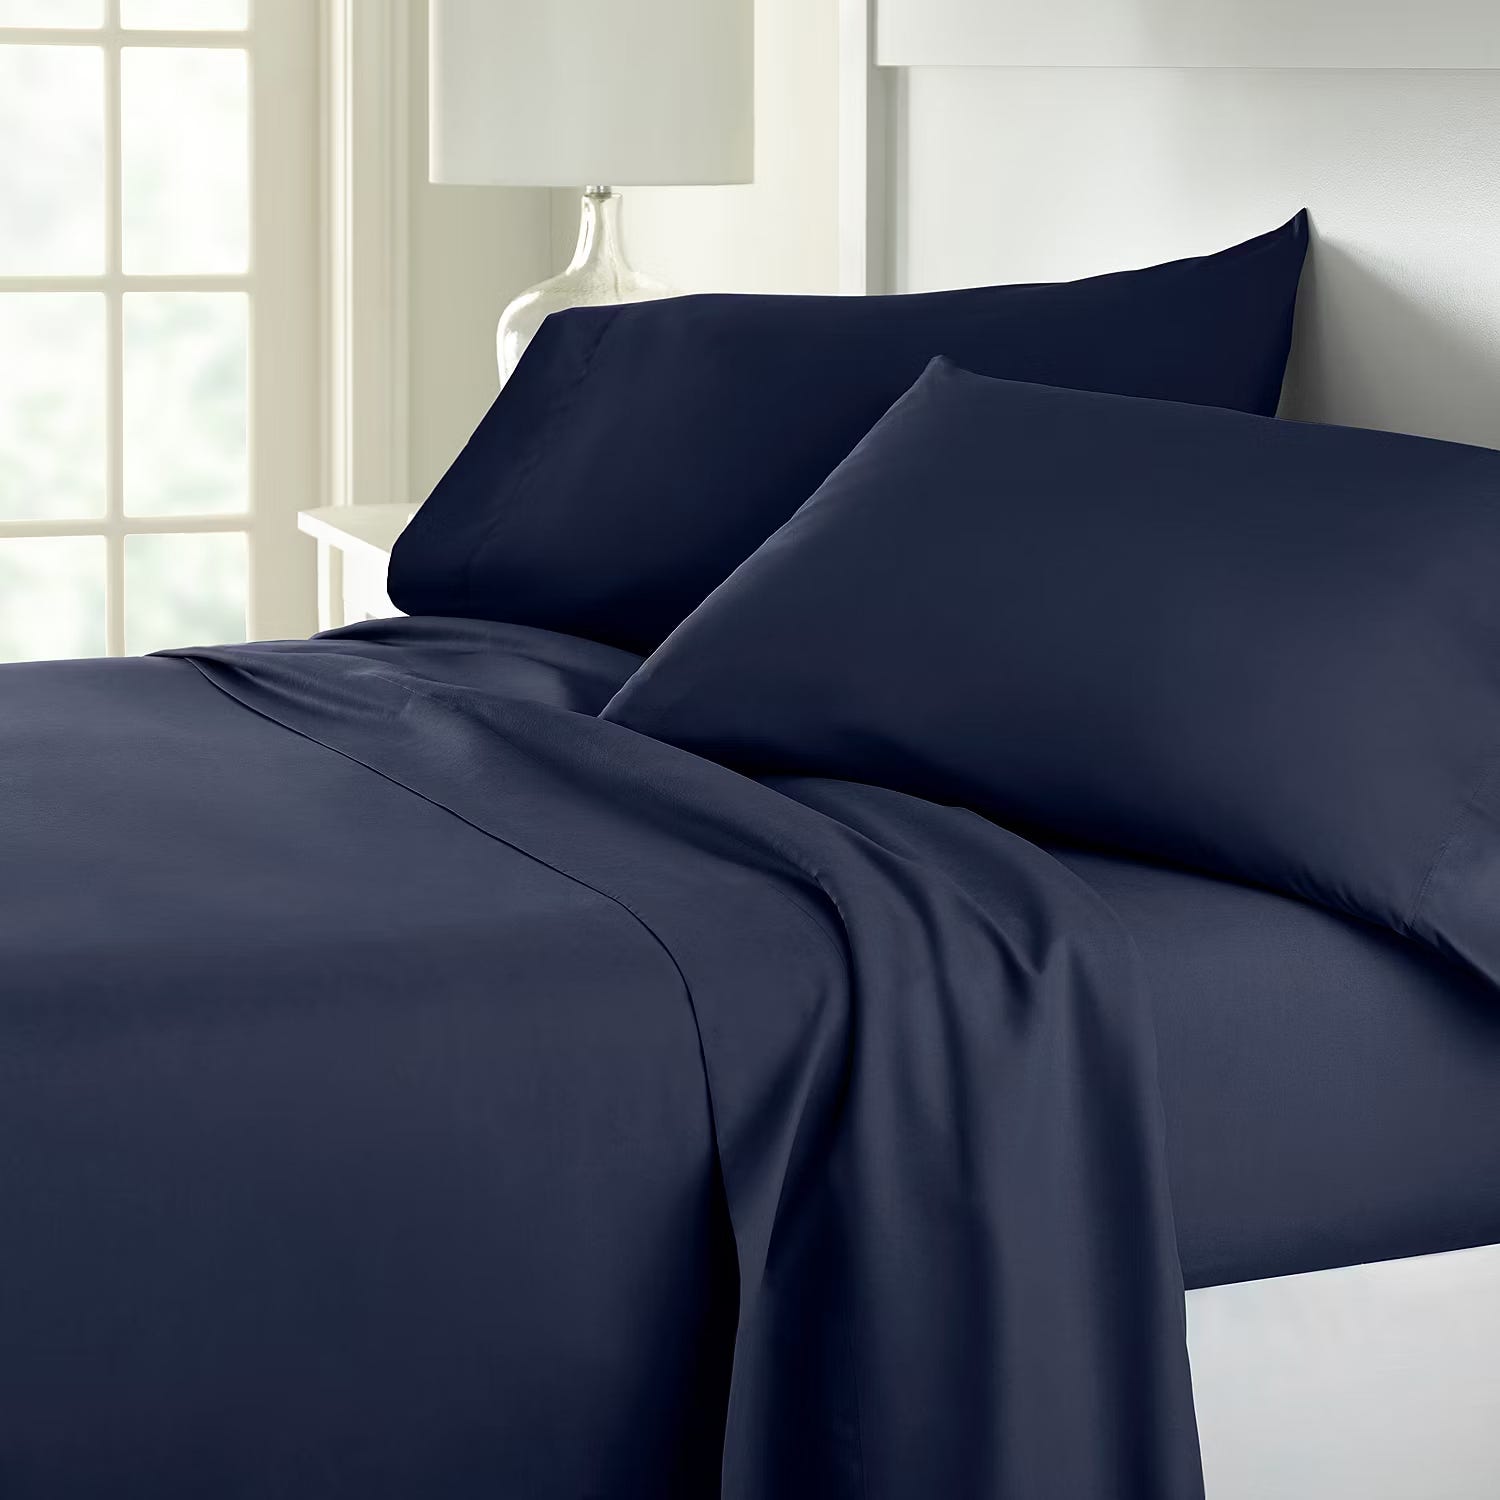 A navy blue bed sheet set with pillowcases on a bed near a window.